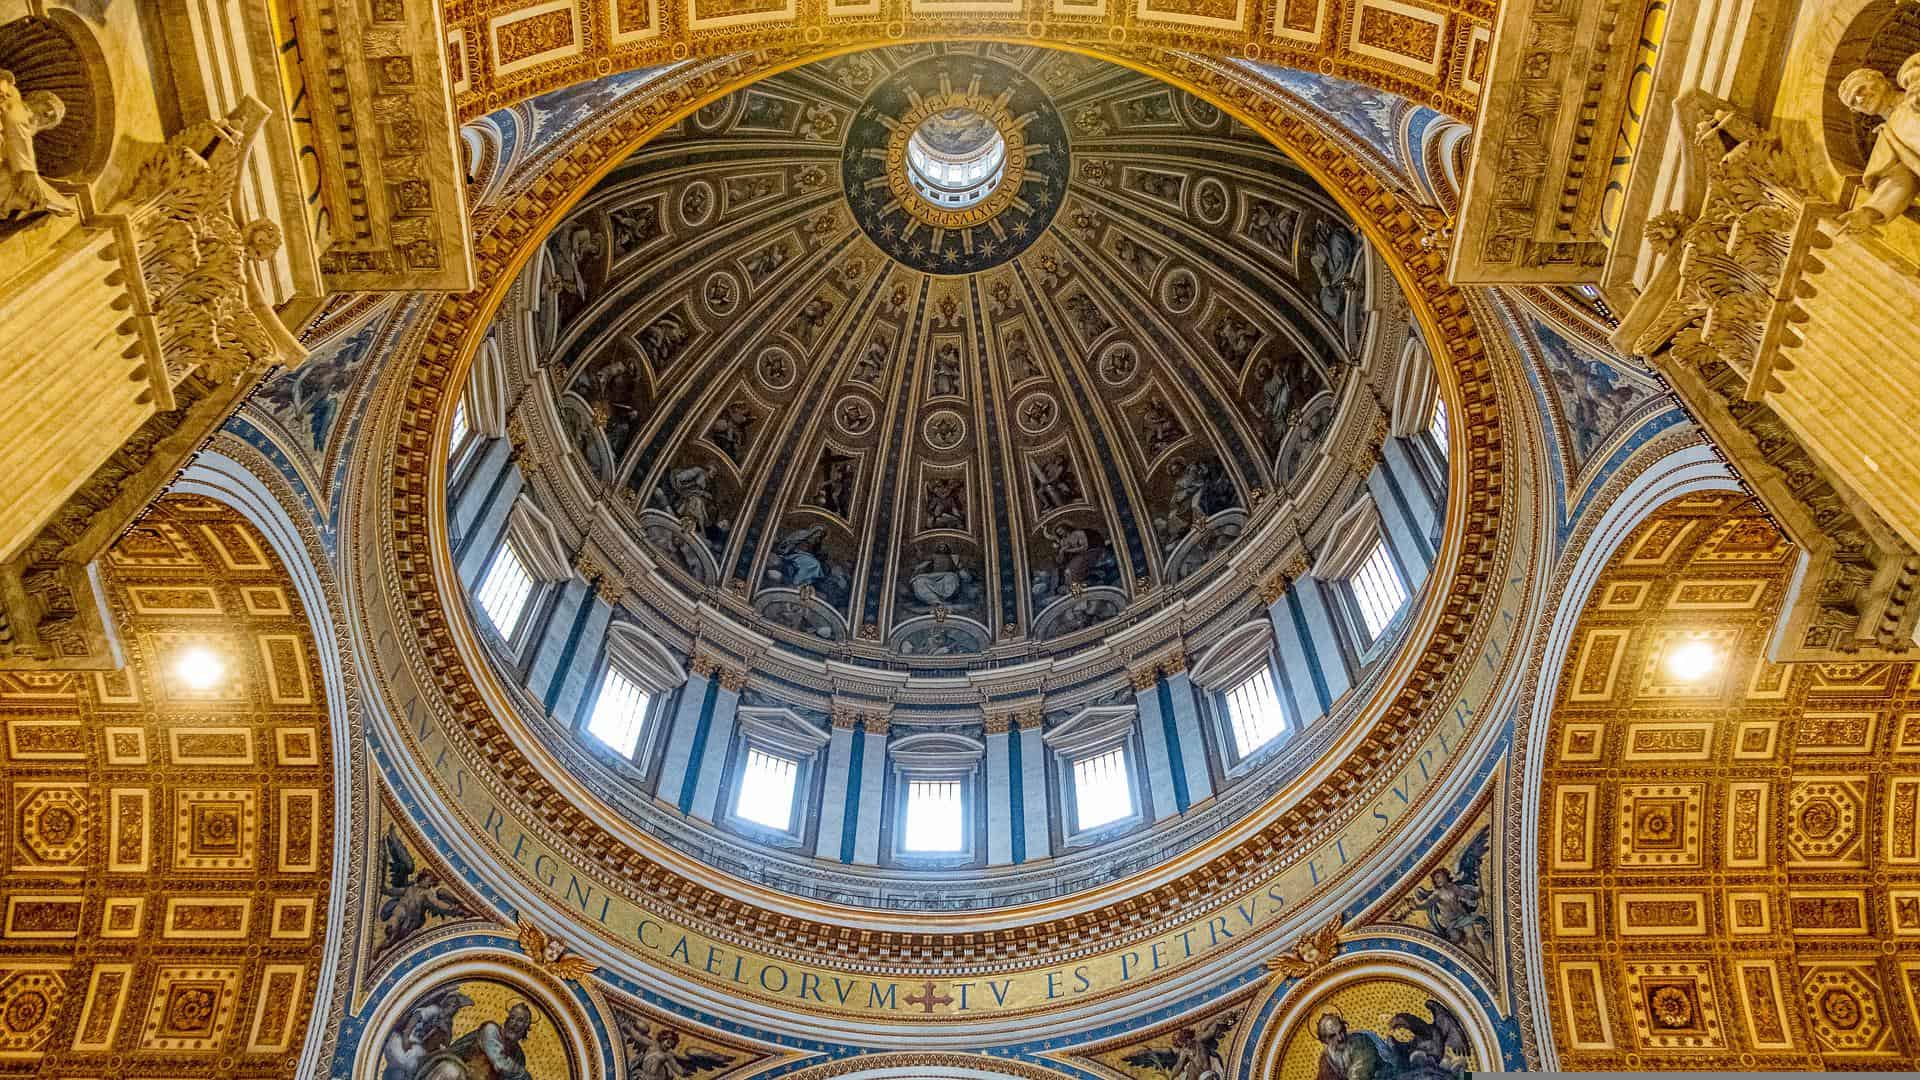 Cupola Dome of St. Peter's Basilica